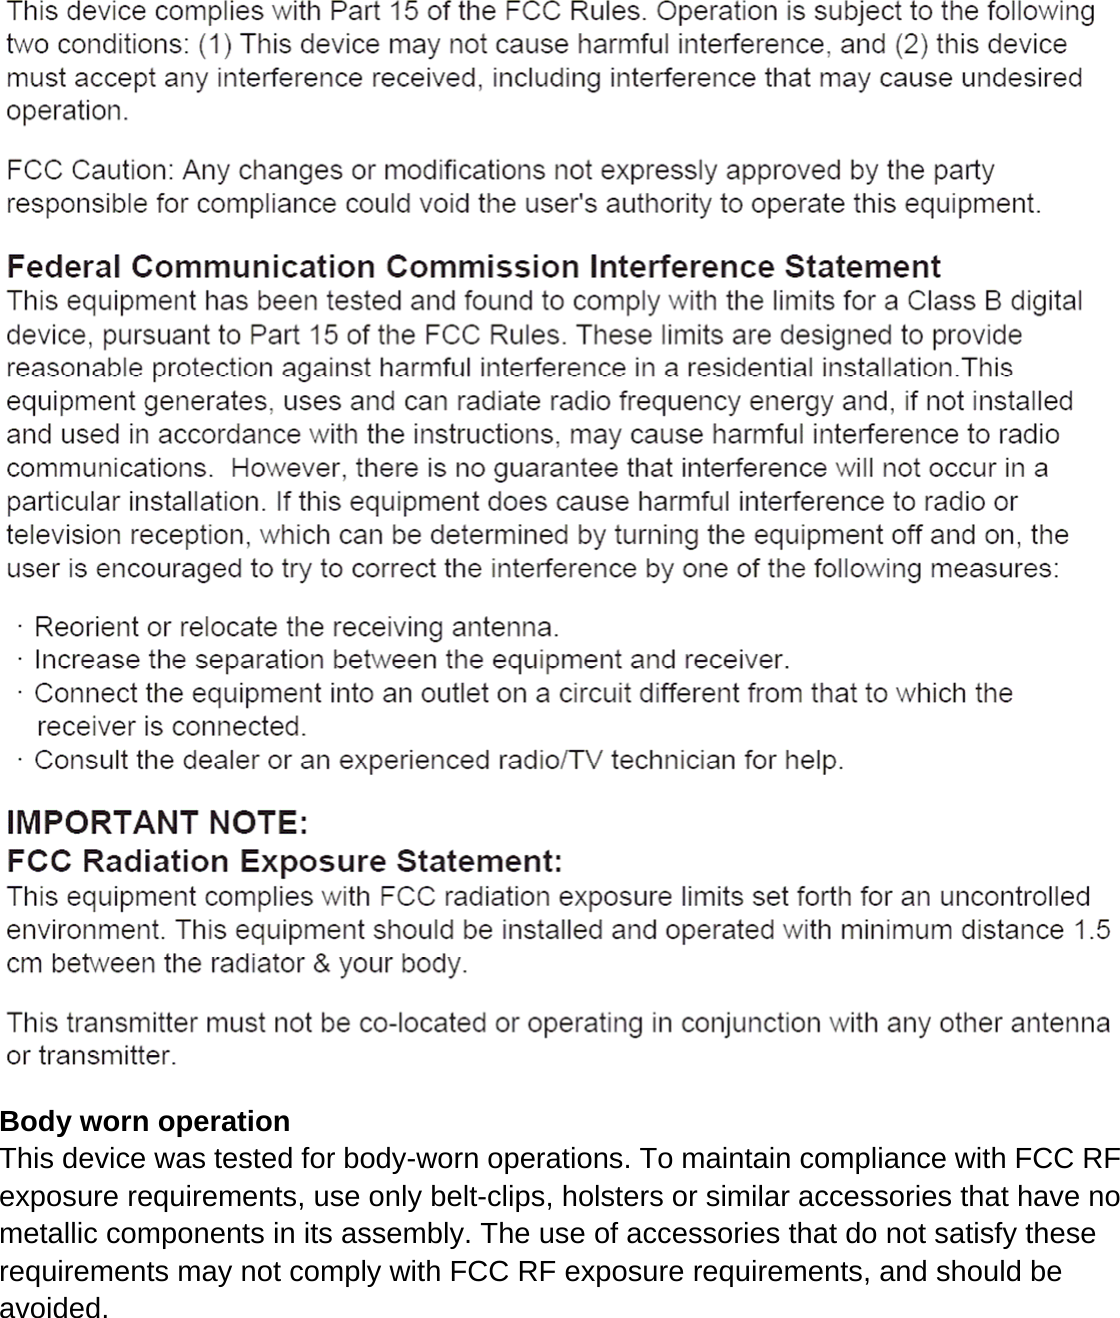  Body worn operation This device was tested for body-worn operations. To maintain compliance with FCC RF exposure requirements, use only belt-clips, holsters or similar accessories that have no metallic components in its assembly. The use of accessories that do not satisfy these requirements may not comply with FCC RF exposure requirements, and should be avoided.  